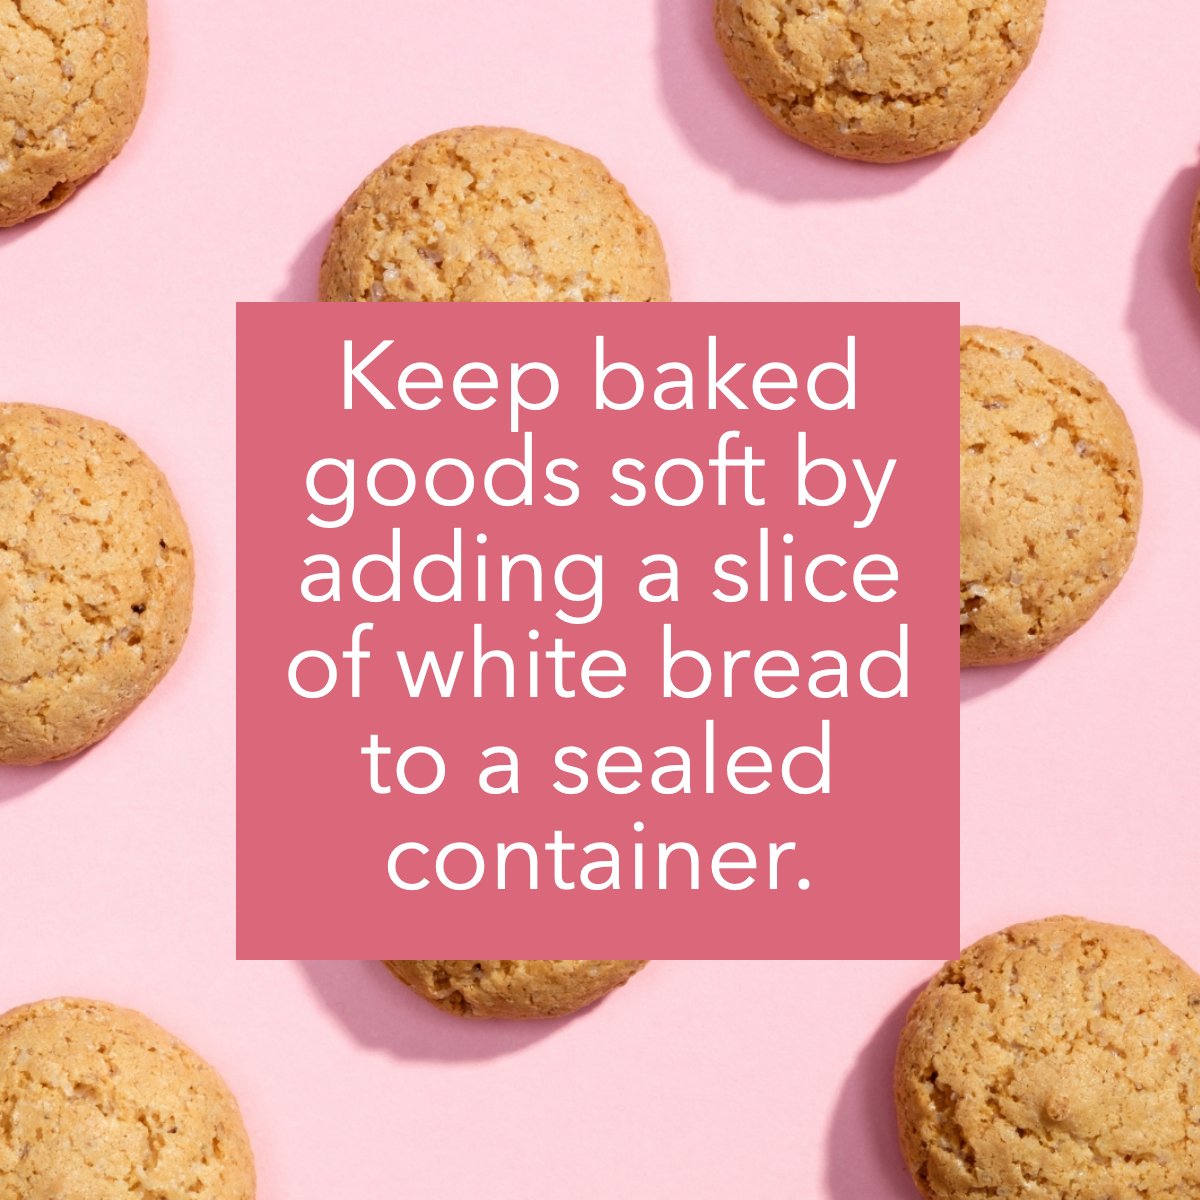 Ready for a #bakinghack?

Keep baked goods soft by adding a slice of white bread 🍞 to a sealed container.

What's the best kind of cookie 🍪? Let us know in the comments!

#cookies #pink #baking #kitchenhack #funfact #bakingtips